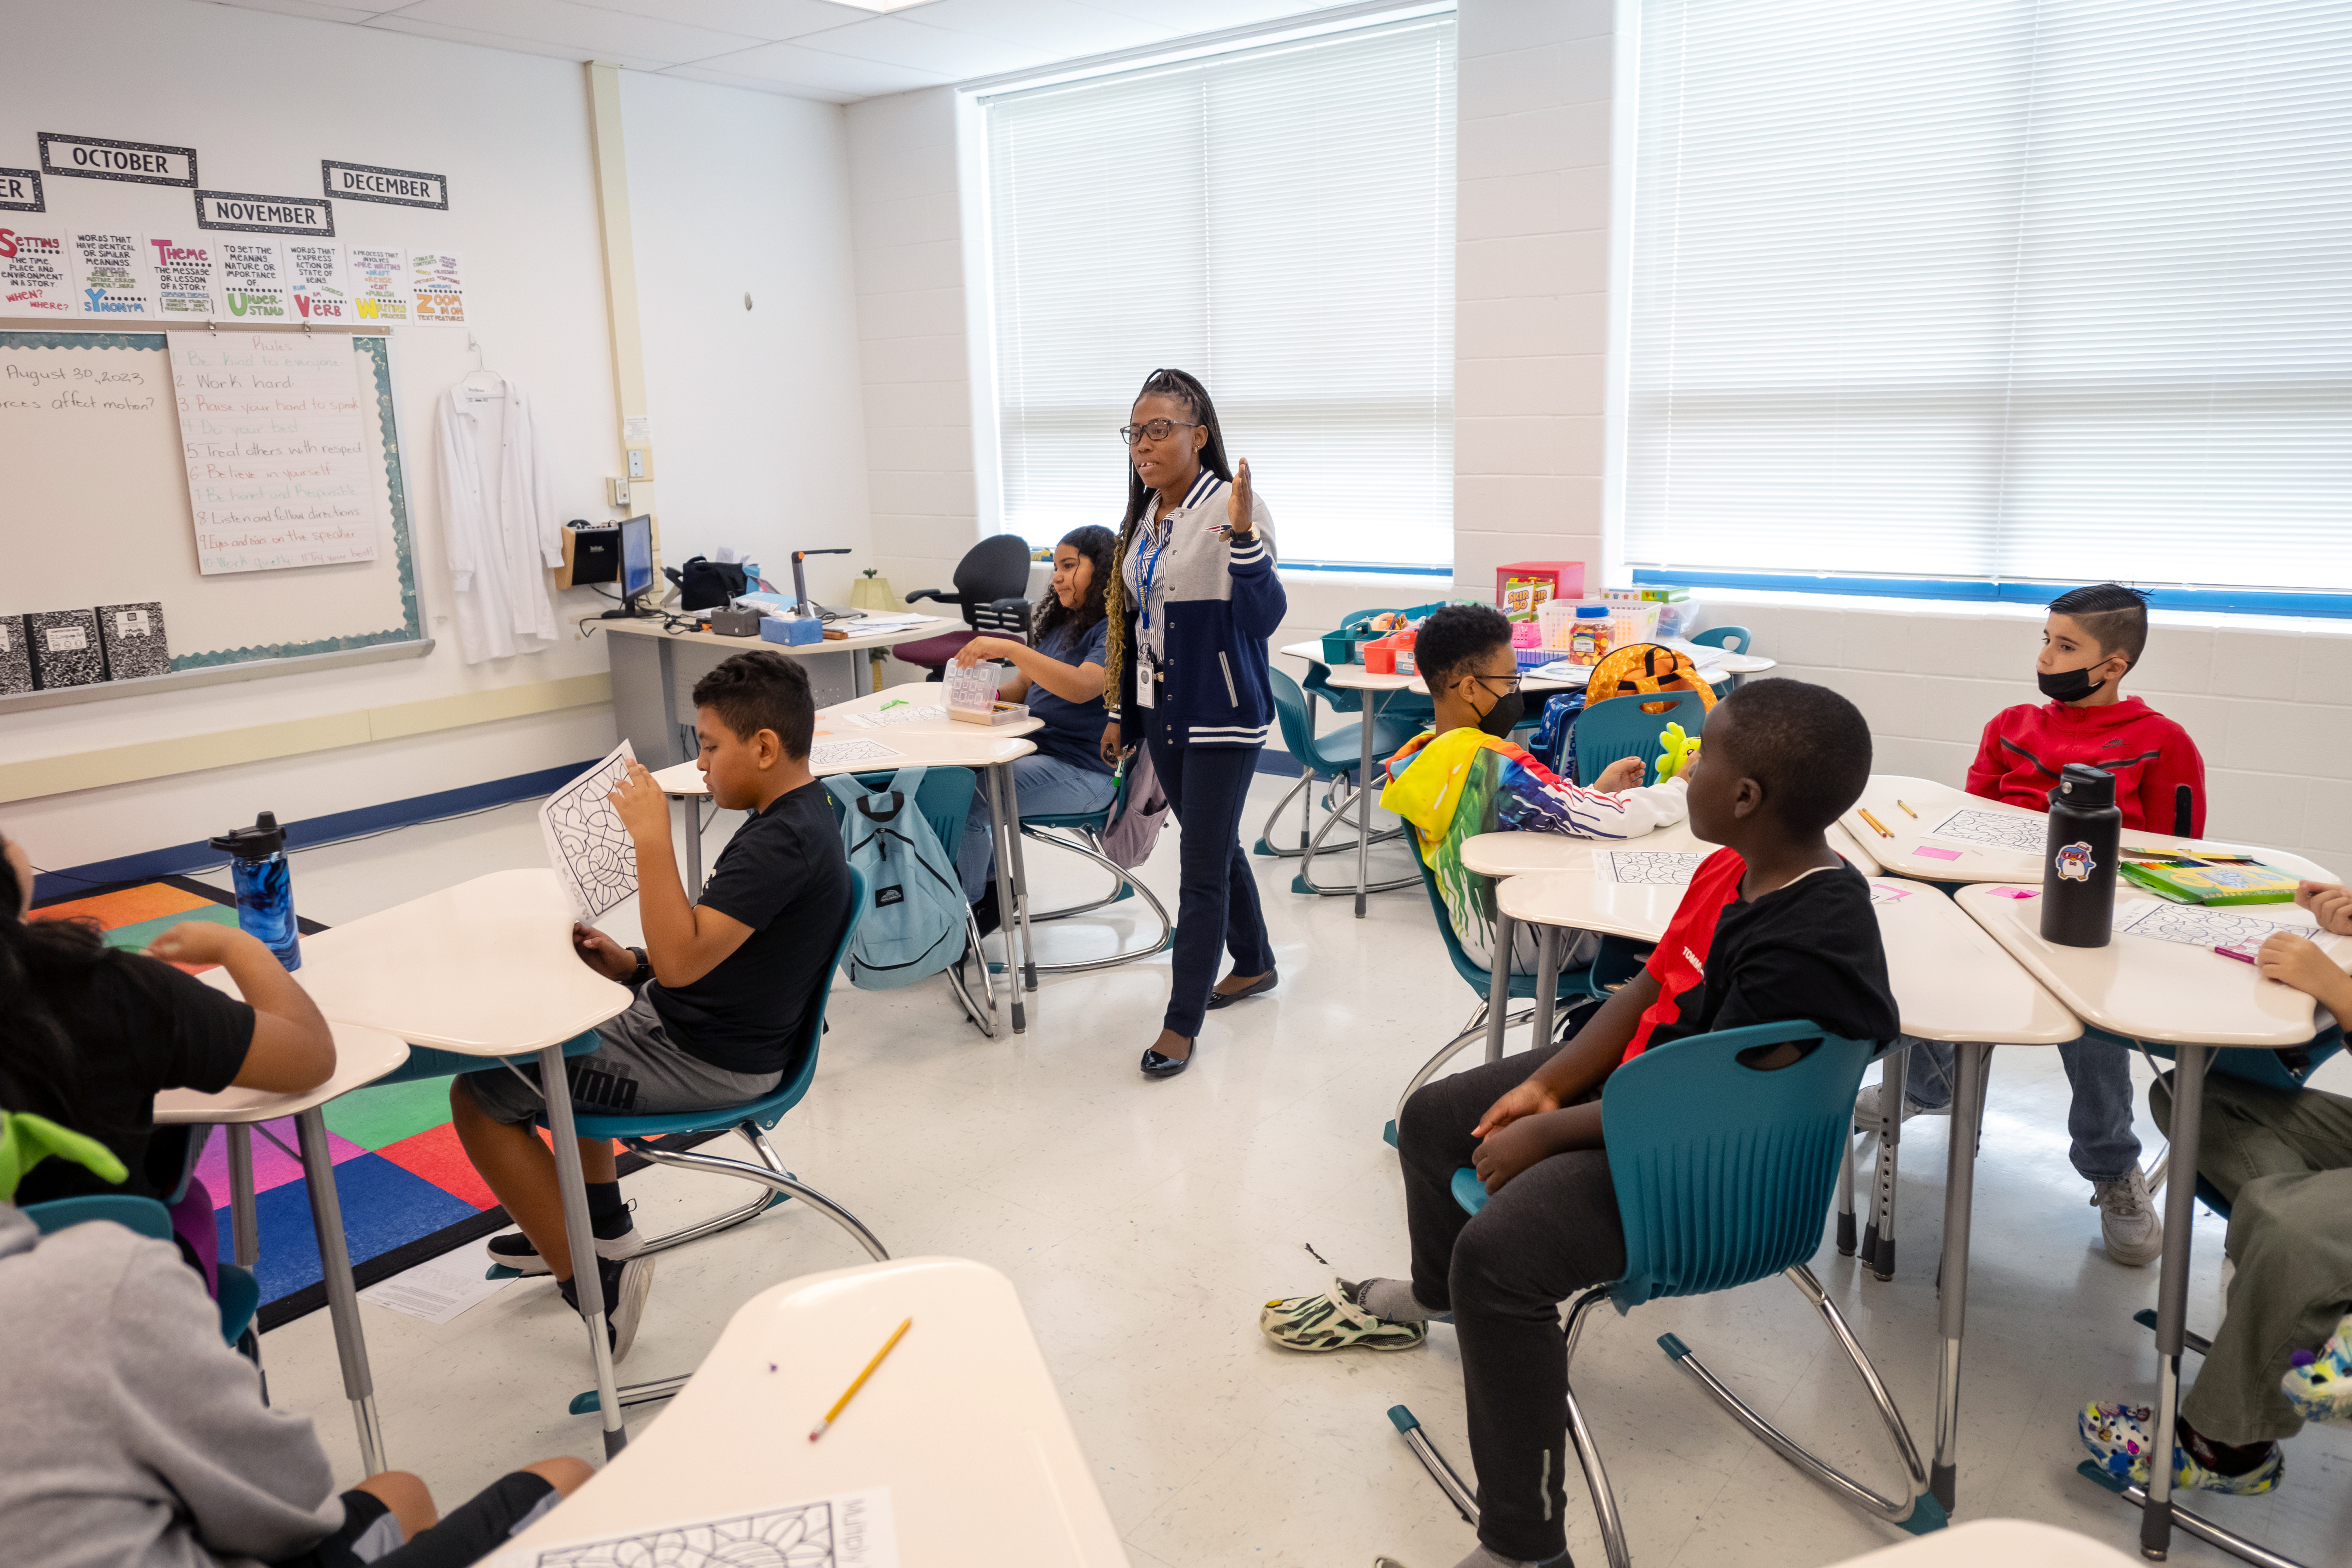 “I am really hoping this enables us to have a stable teaching workforce at Woodlawn for the next three to five years,” she said.